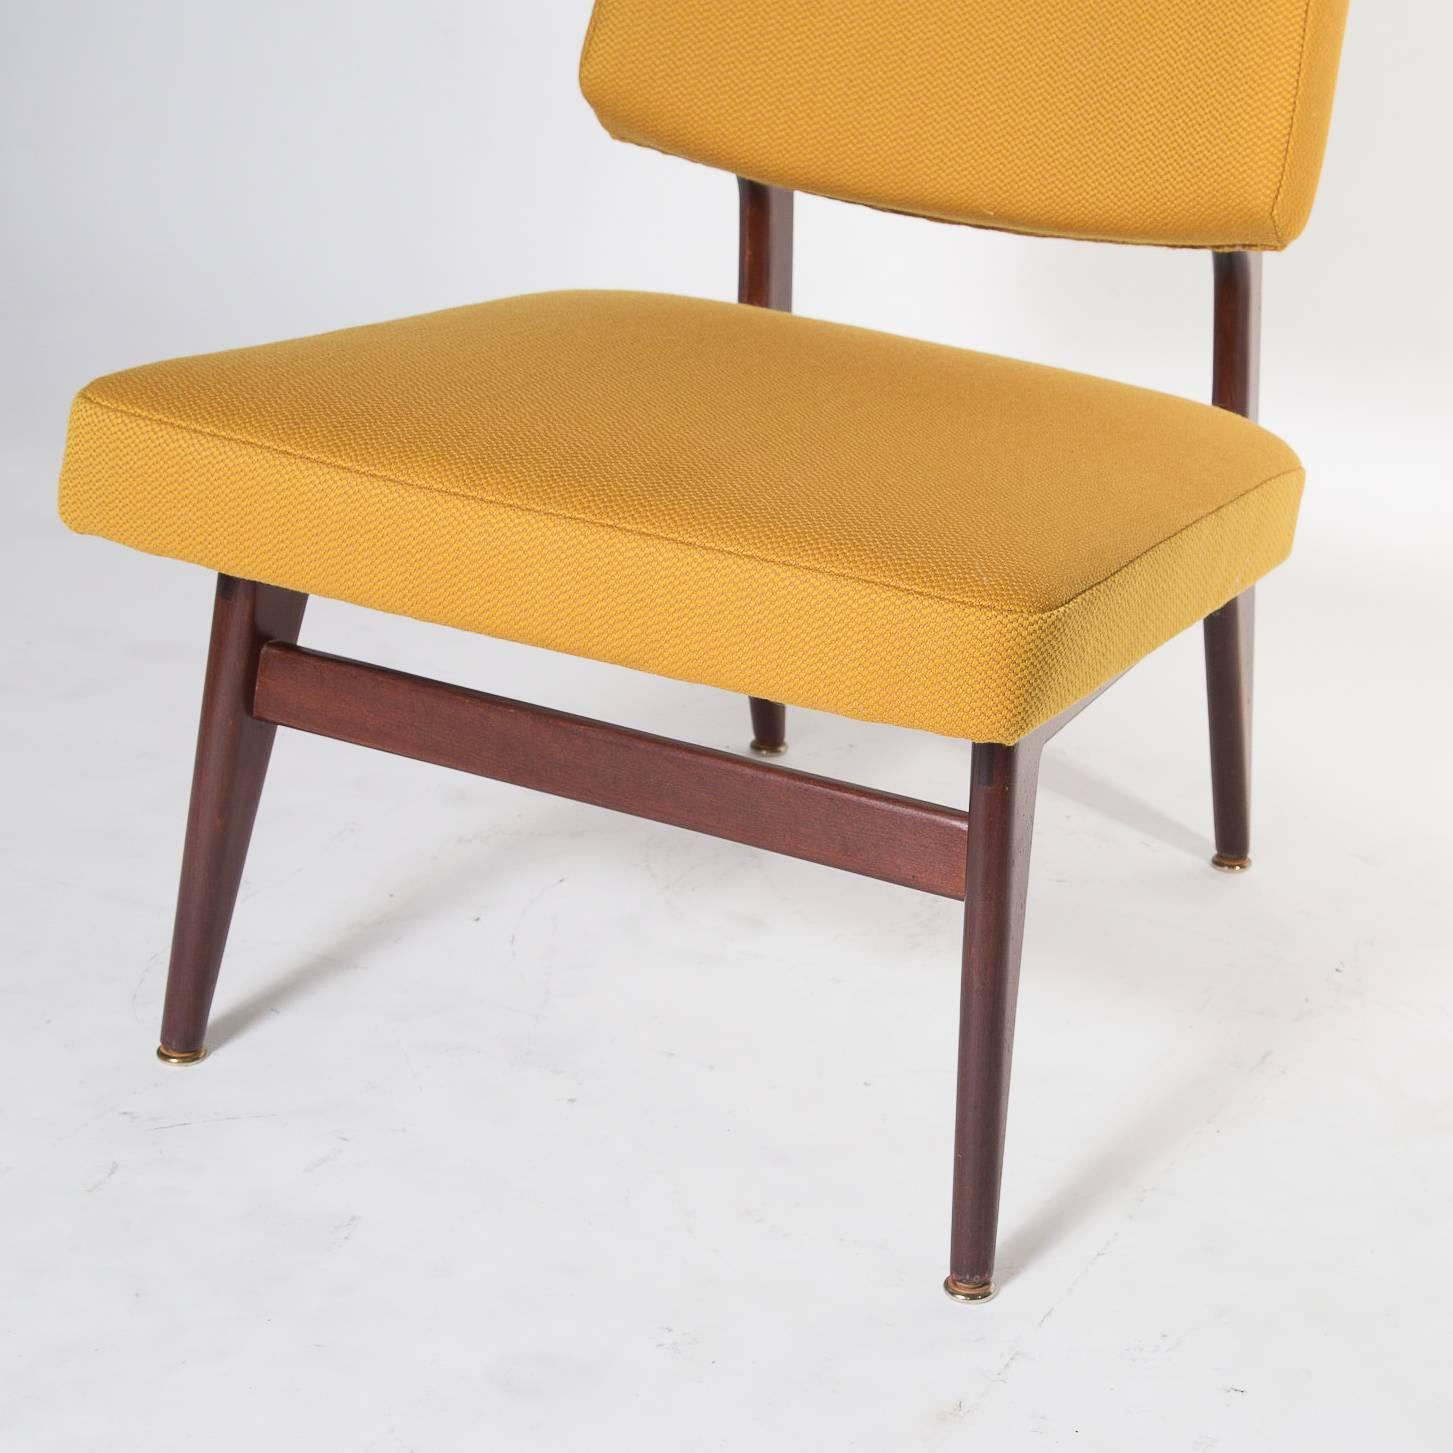 3 Thonet No. 681 Mid-Century Design Chairs Designed 1958 by Eberle, Germany 1965 For Sale 1